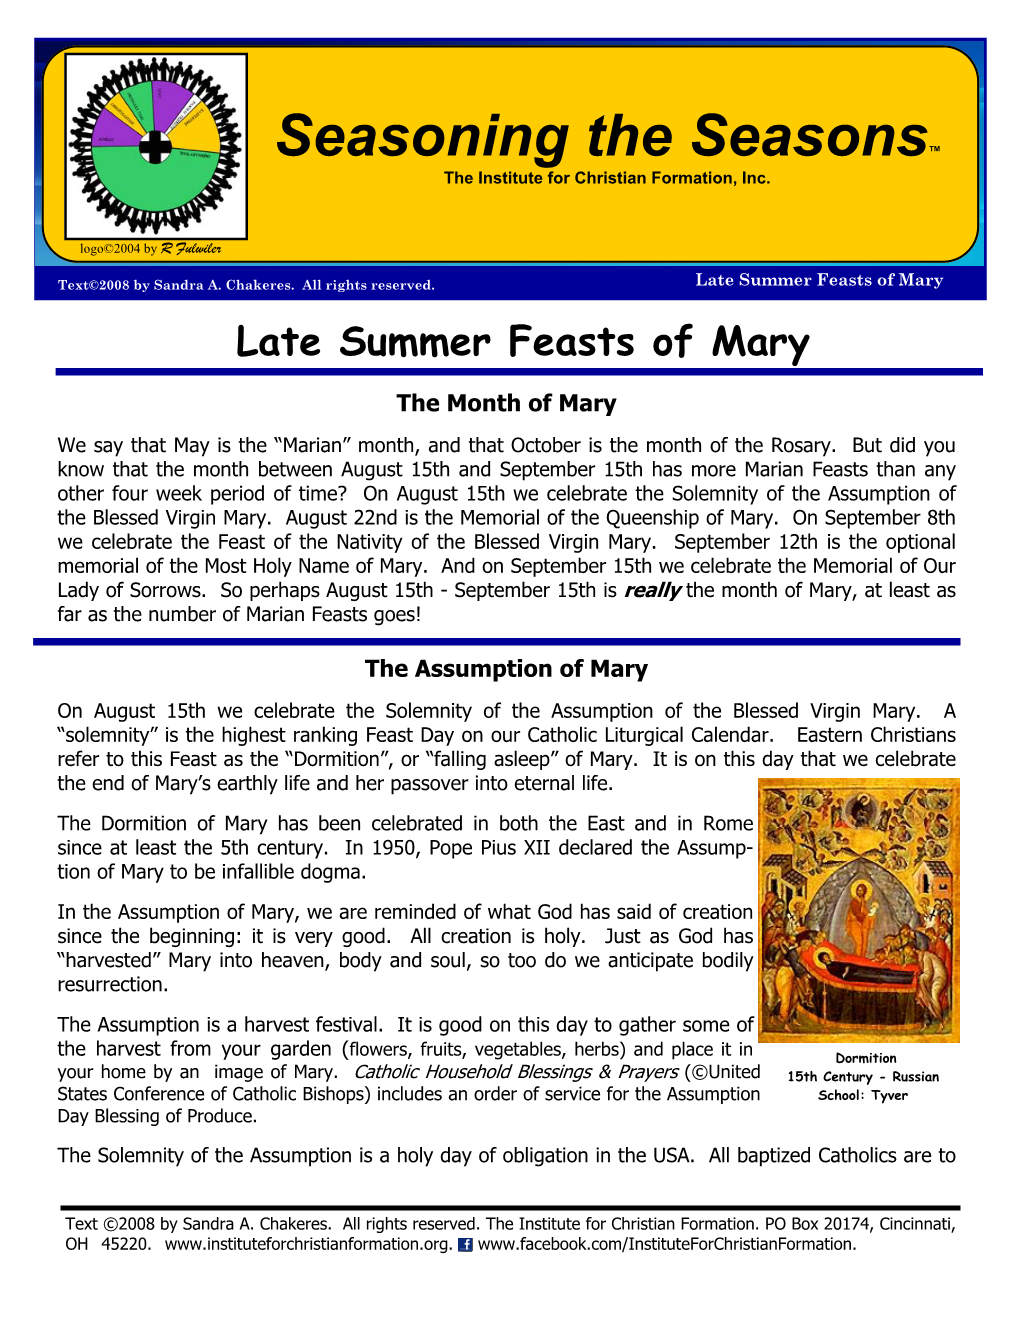 Late Summer Feasts of Mary Late Summer Feasts of Mary